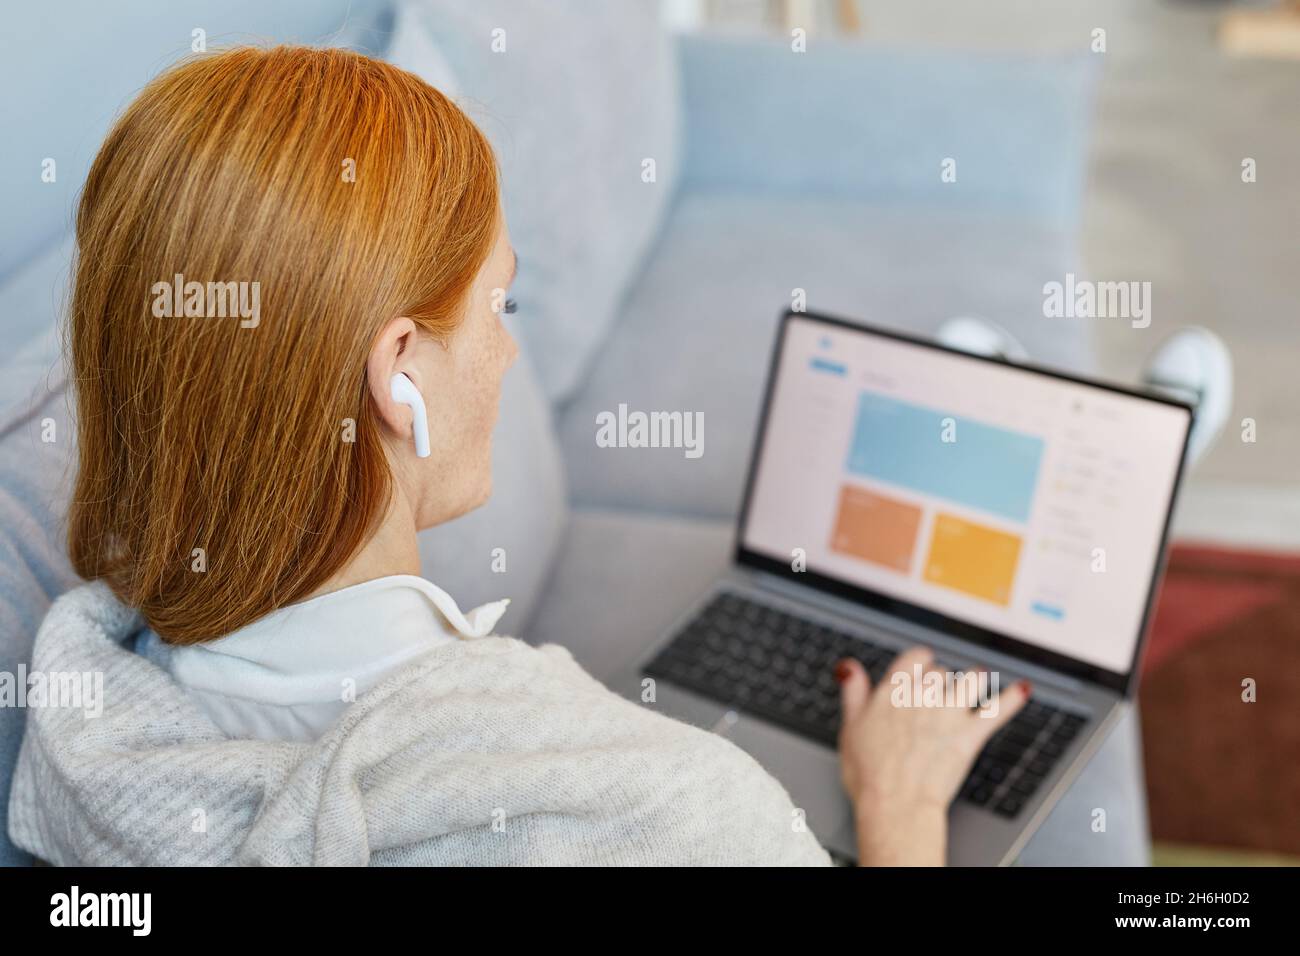 Back view portrait of adult red haired woman using laptop on sofa while studying online from home, copy space Stock Photo